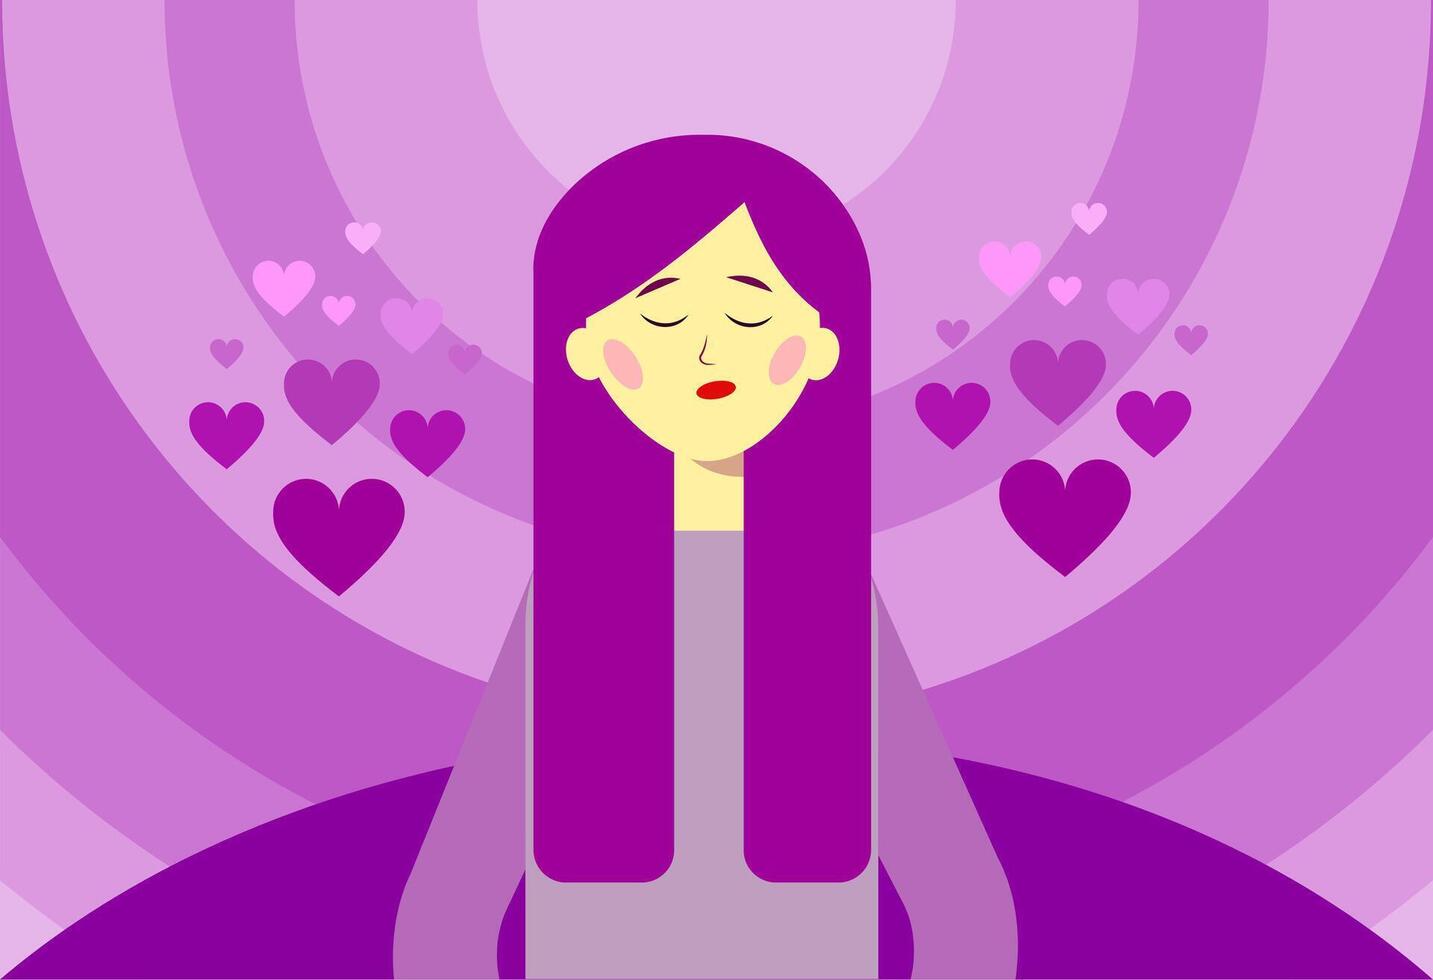 Girl with purple hair with hearts around. Flat vector illustration